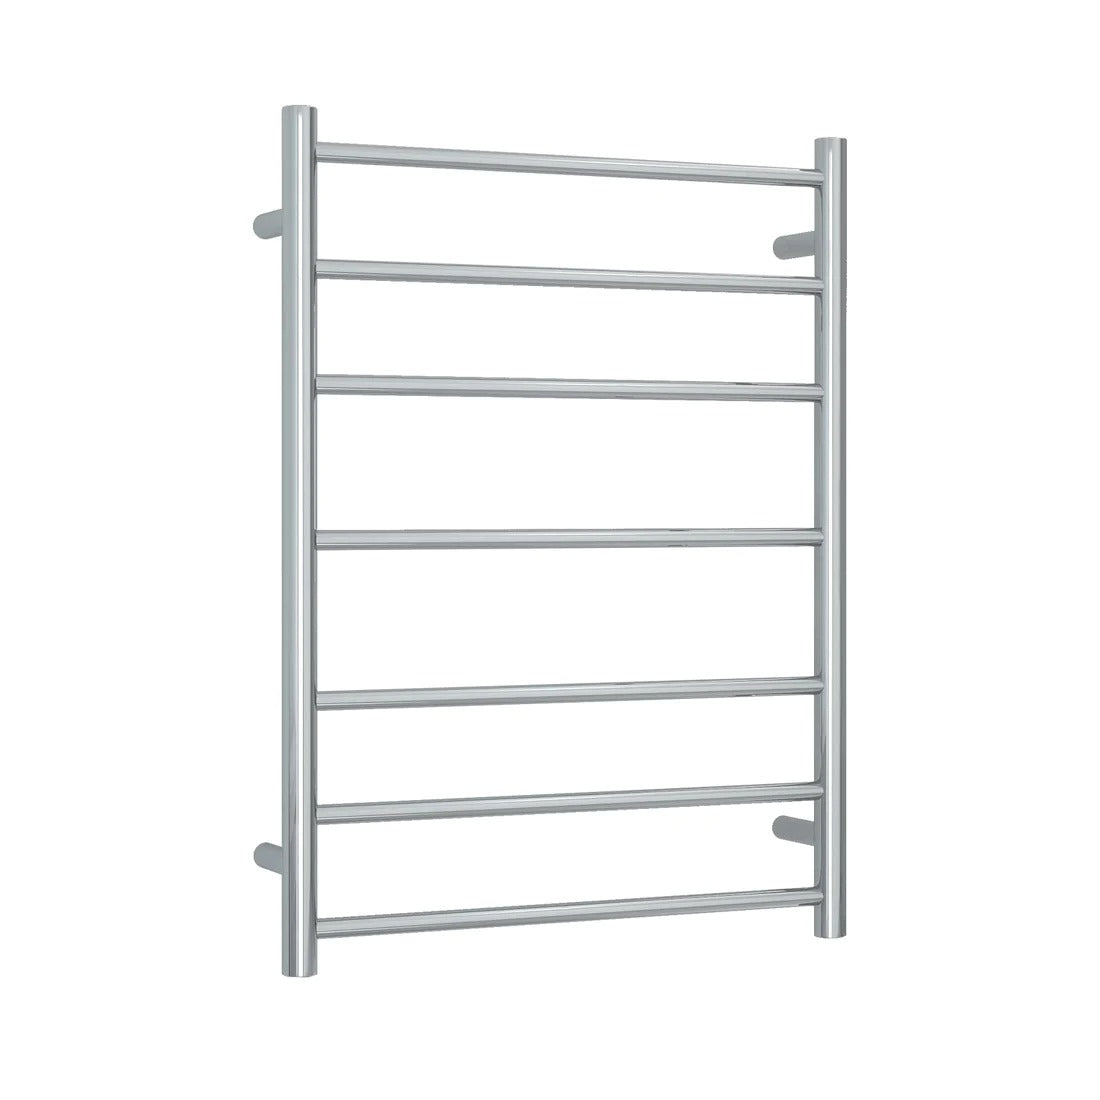 THERMOGROUP ROUND LADDER HEATED TOWEL RAIL STAINLESS STEEL 800MM